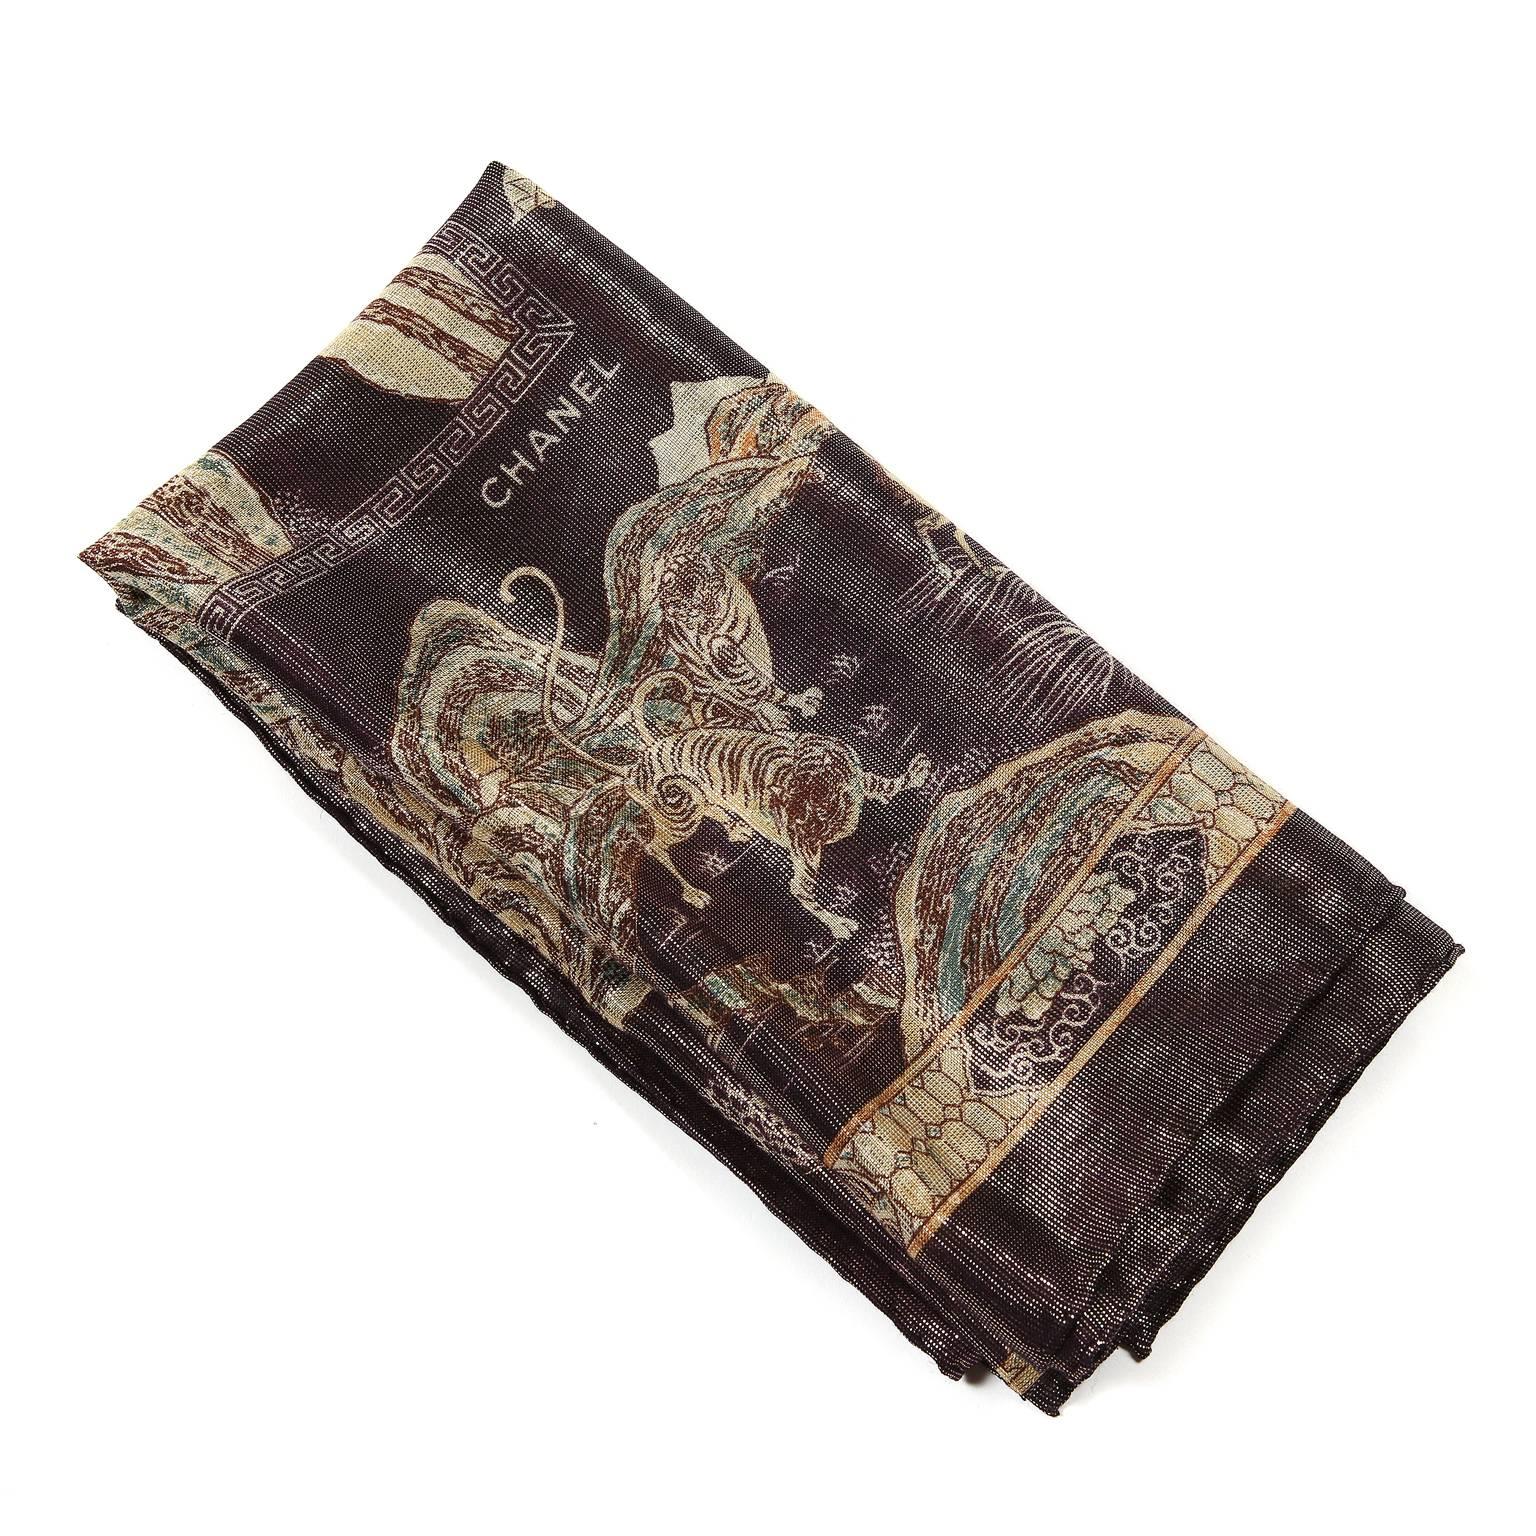 Chanel Black Oriental Gold Threads Shawl- EXCELLENT
  Black background is interspersed with glittering gold threads. Traditional Asian scenery covers the landscape: wild animals, people, ocean scenes, architecture. 